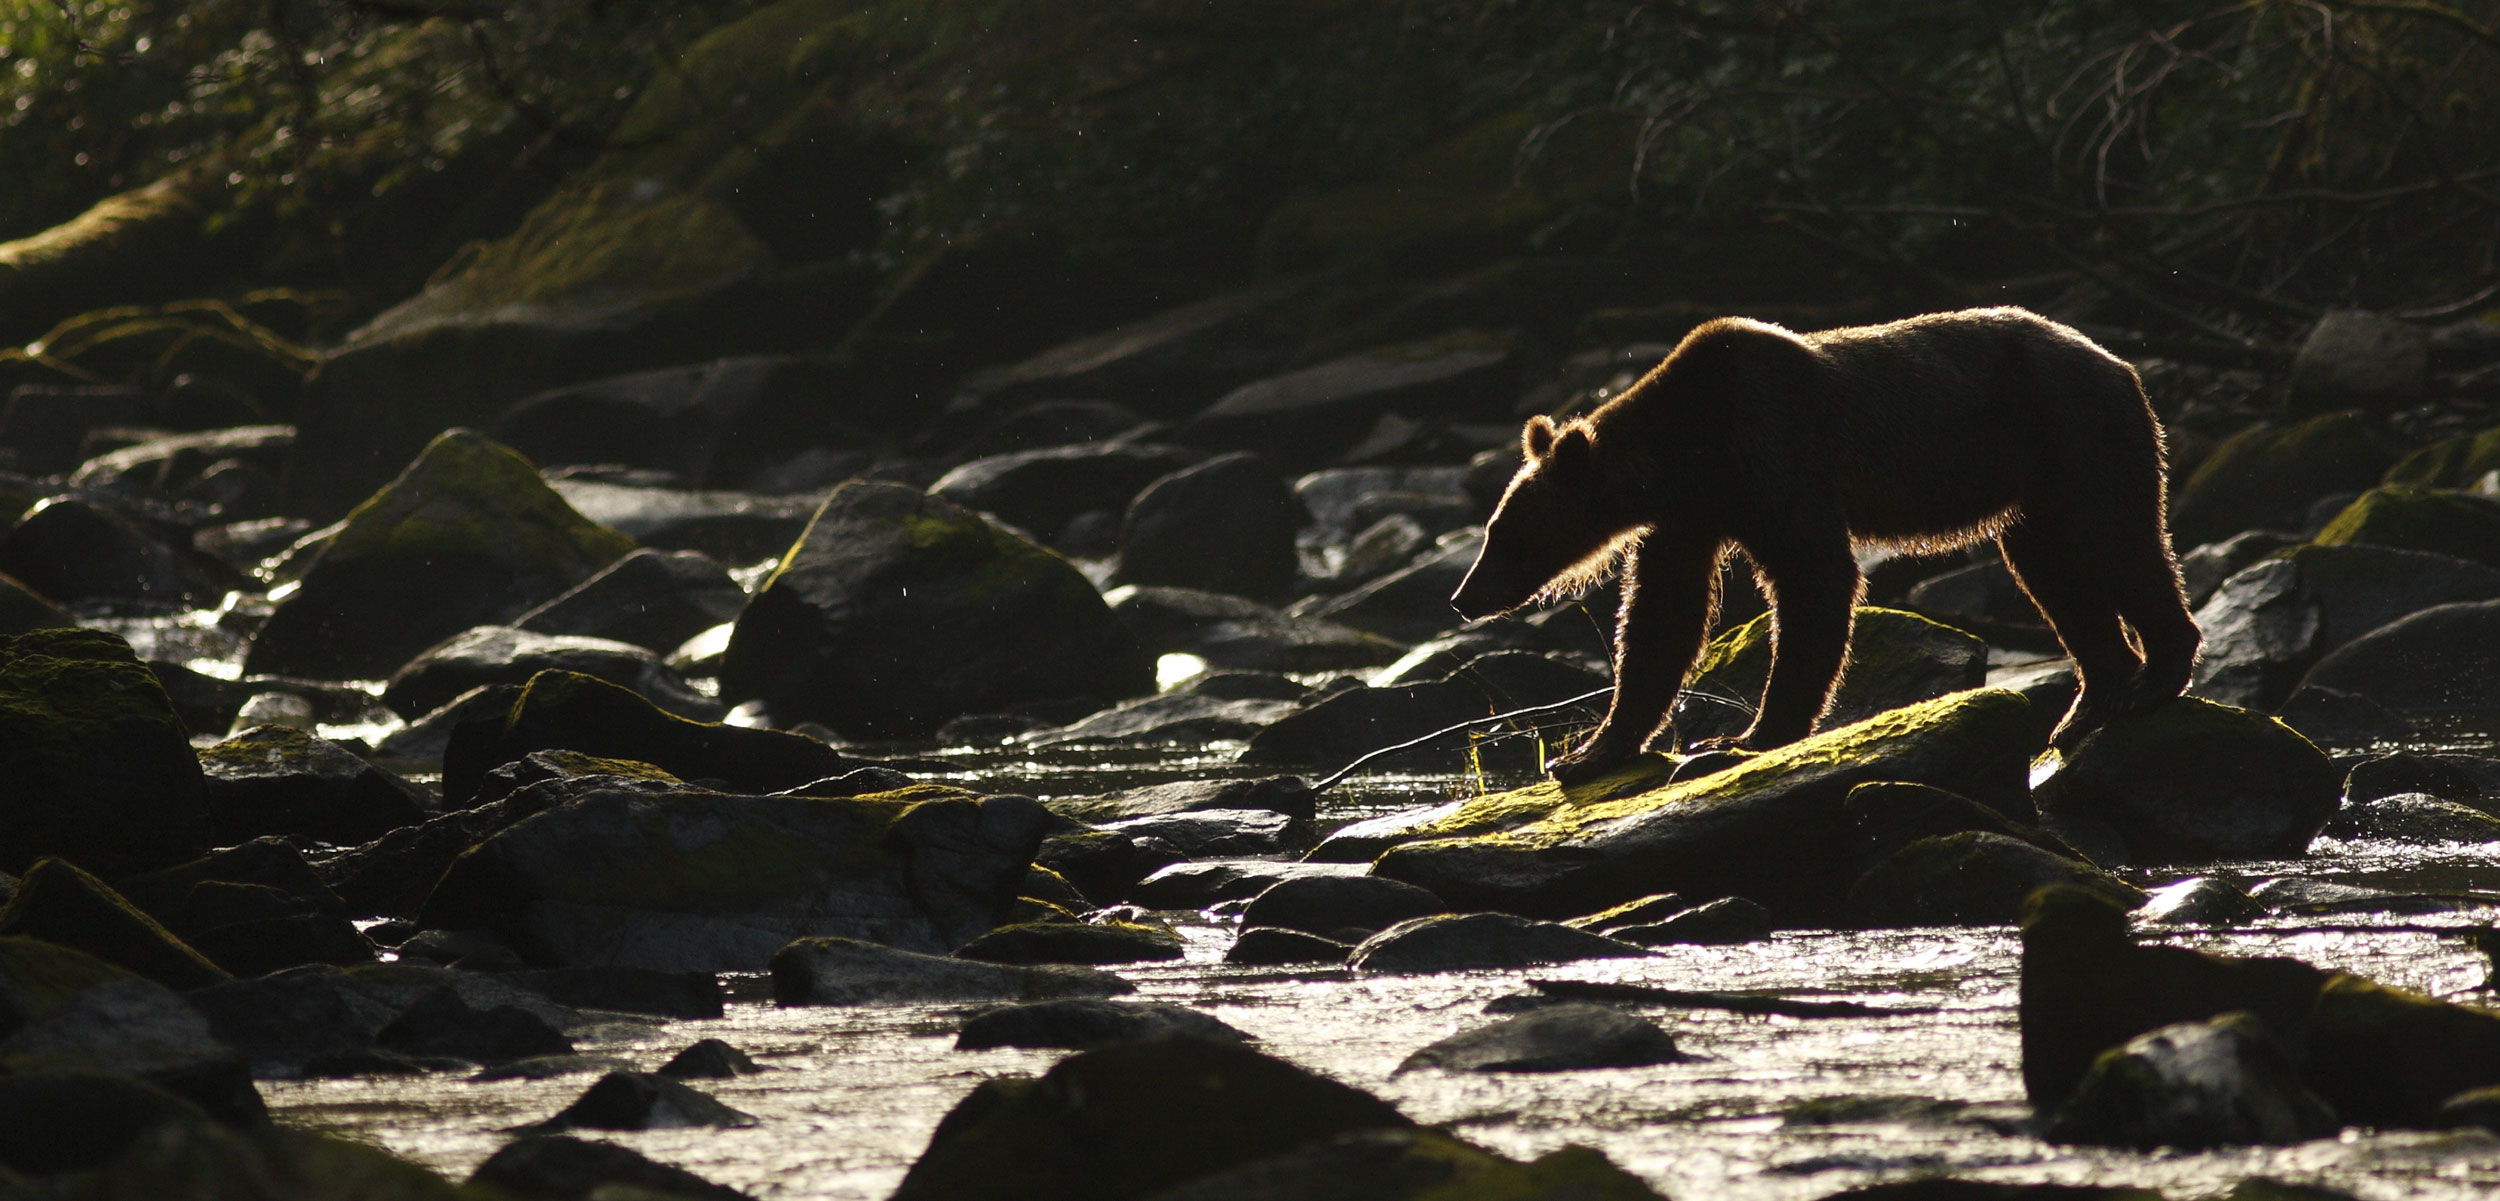 Grizzly Bear (Ursus arctos horribilis) adult, fishing for salmon in the Great Bear Rainforest